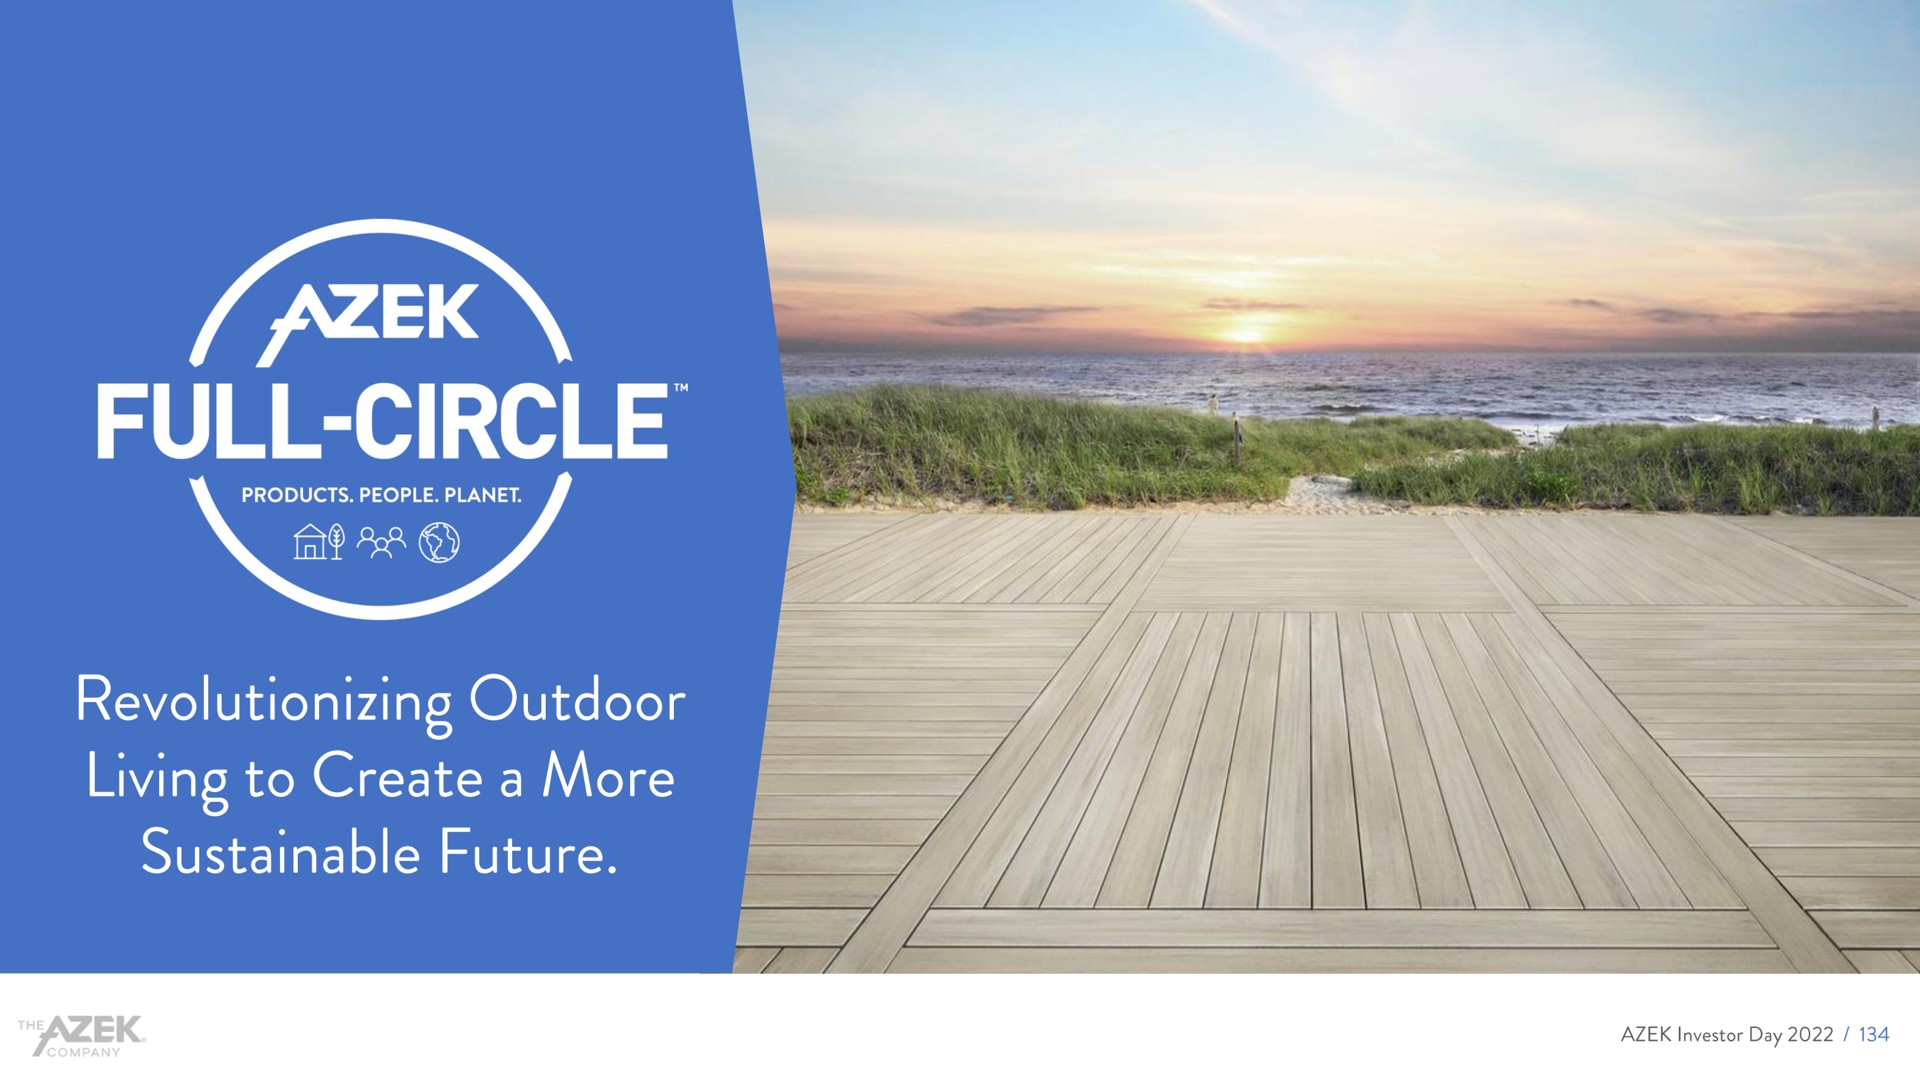 tri sustainable future revolutionizing outdoor create a more | Azek